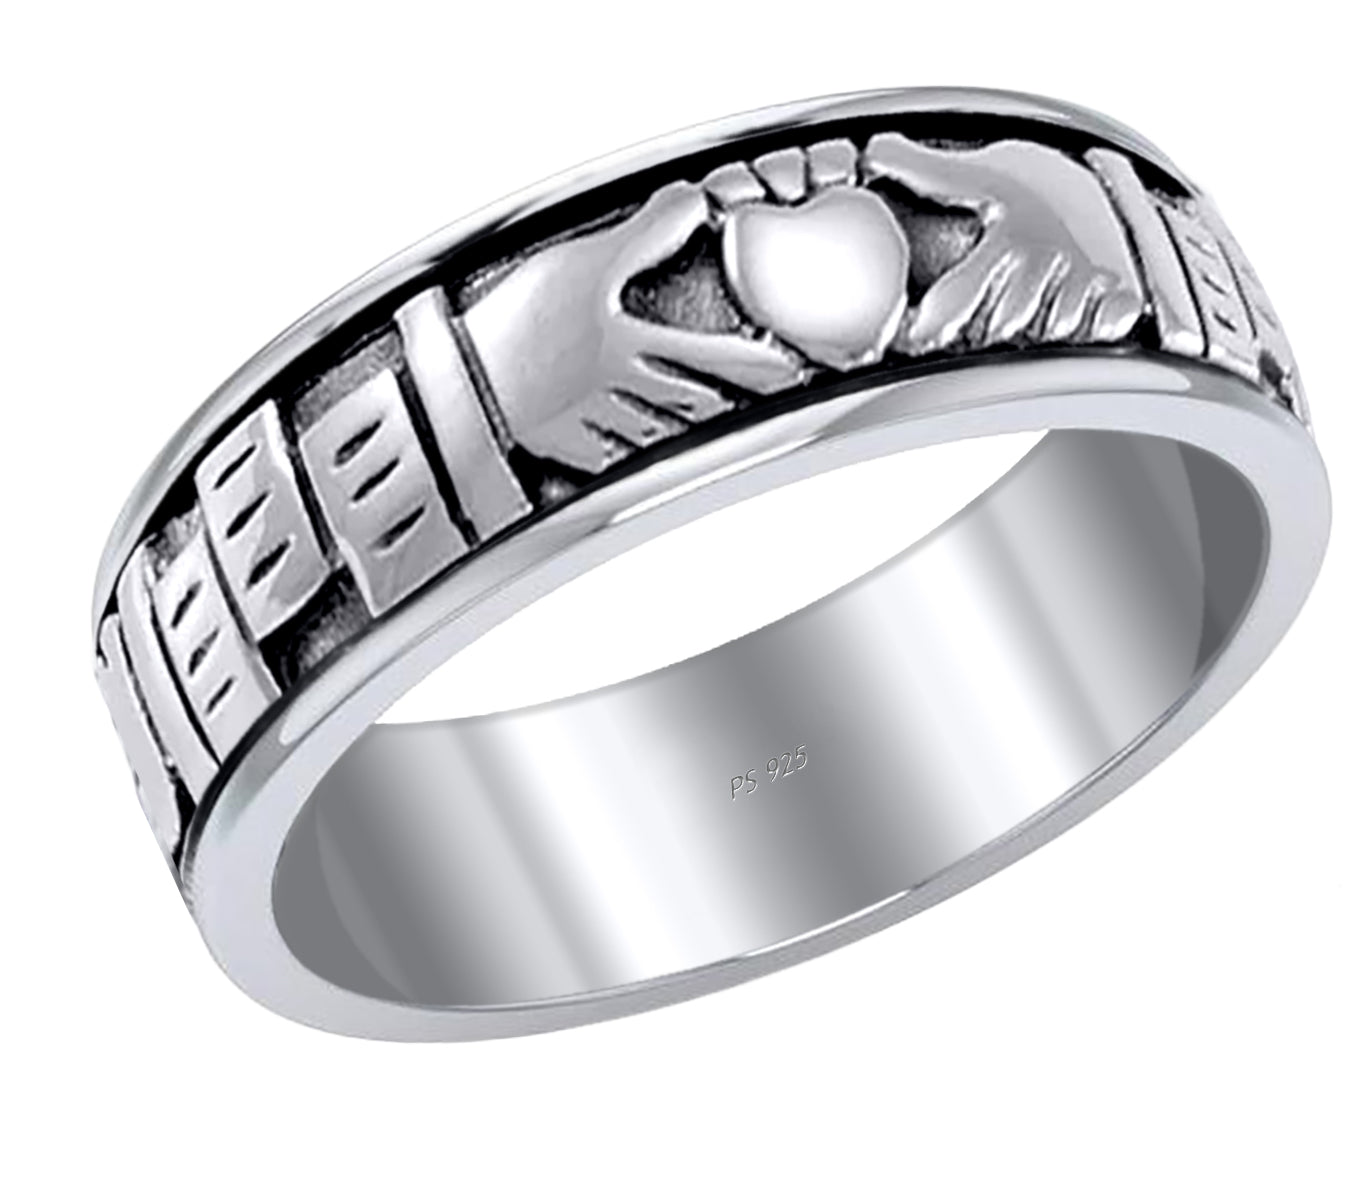 Men's 925 Sterling Silver Irish Celtic Claddagh Spinner Ring Band - US Jewels